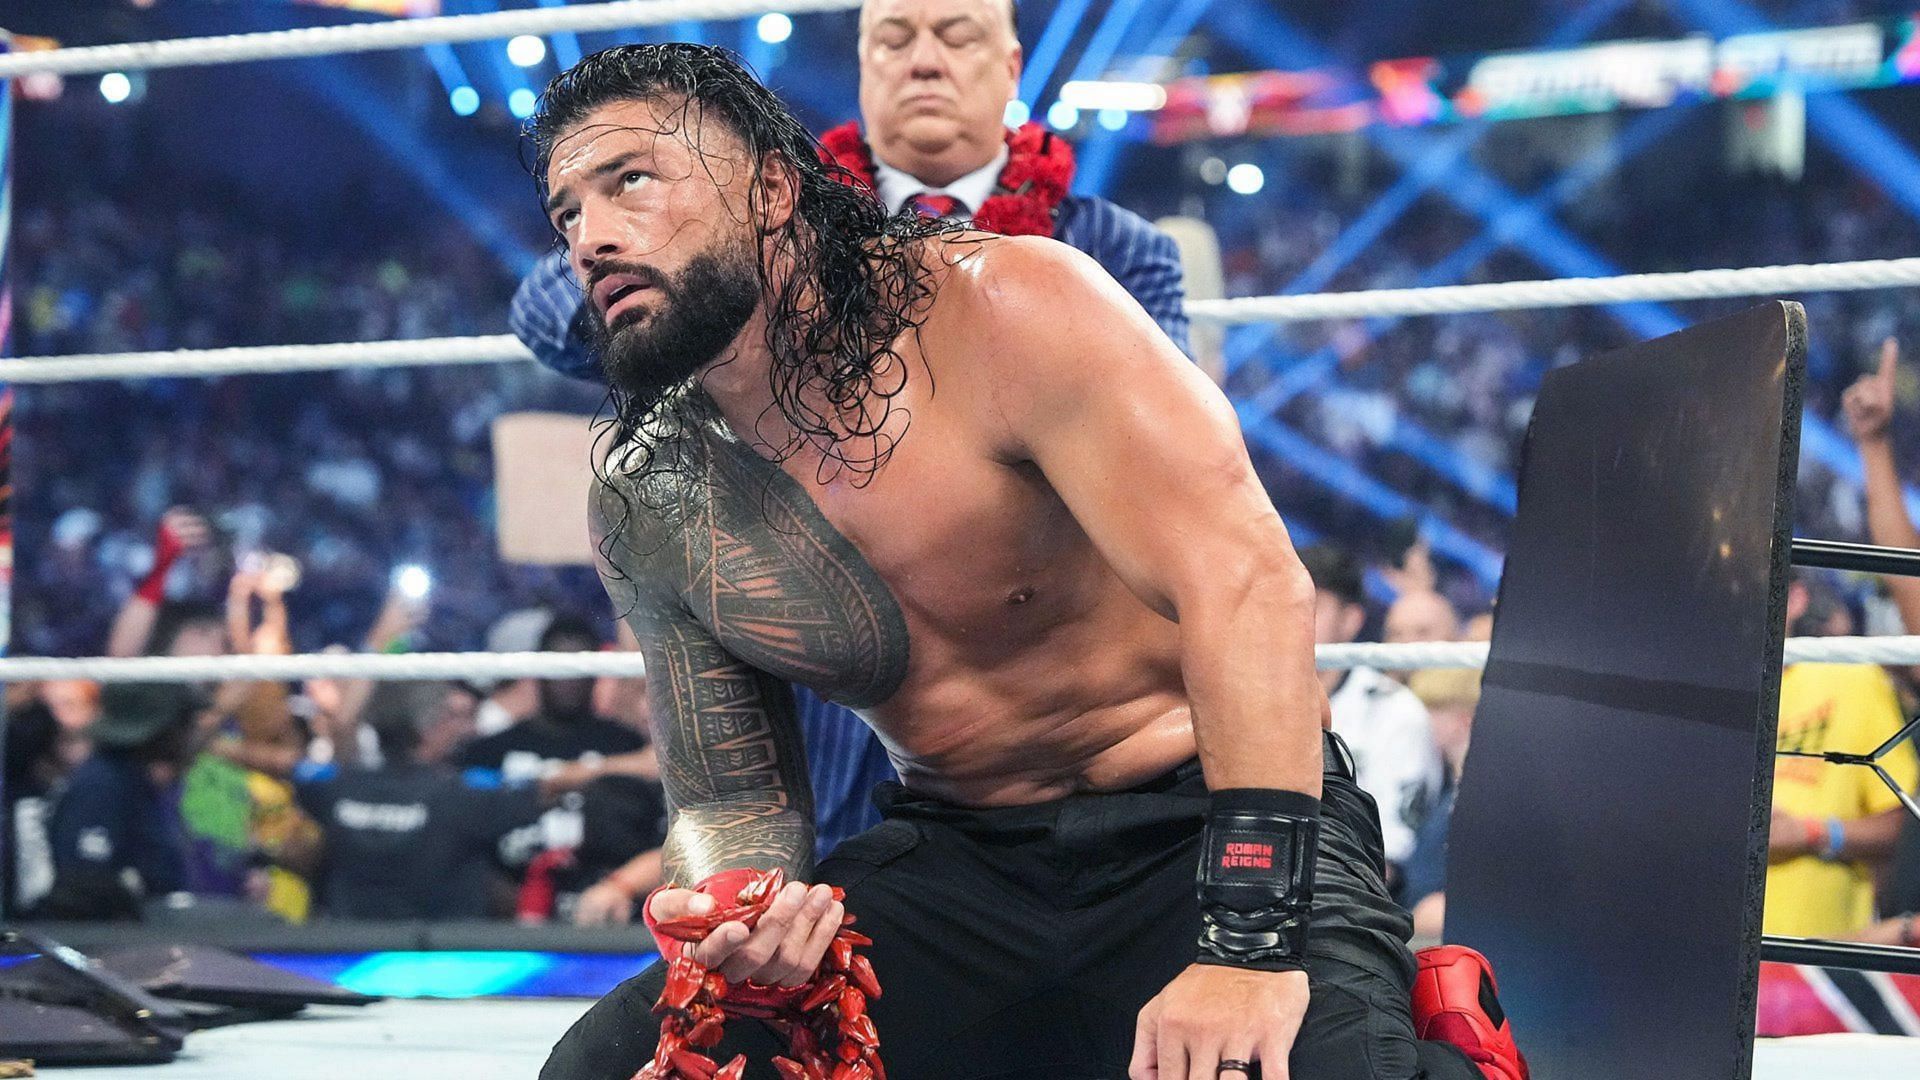 Major WWE star dethroning Roman Reigns after The Tribal Chief squares